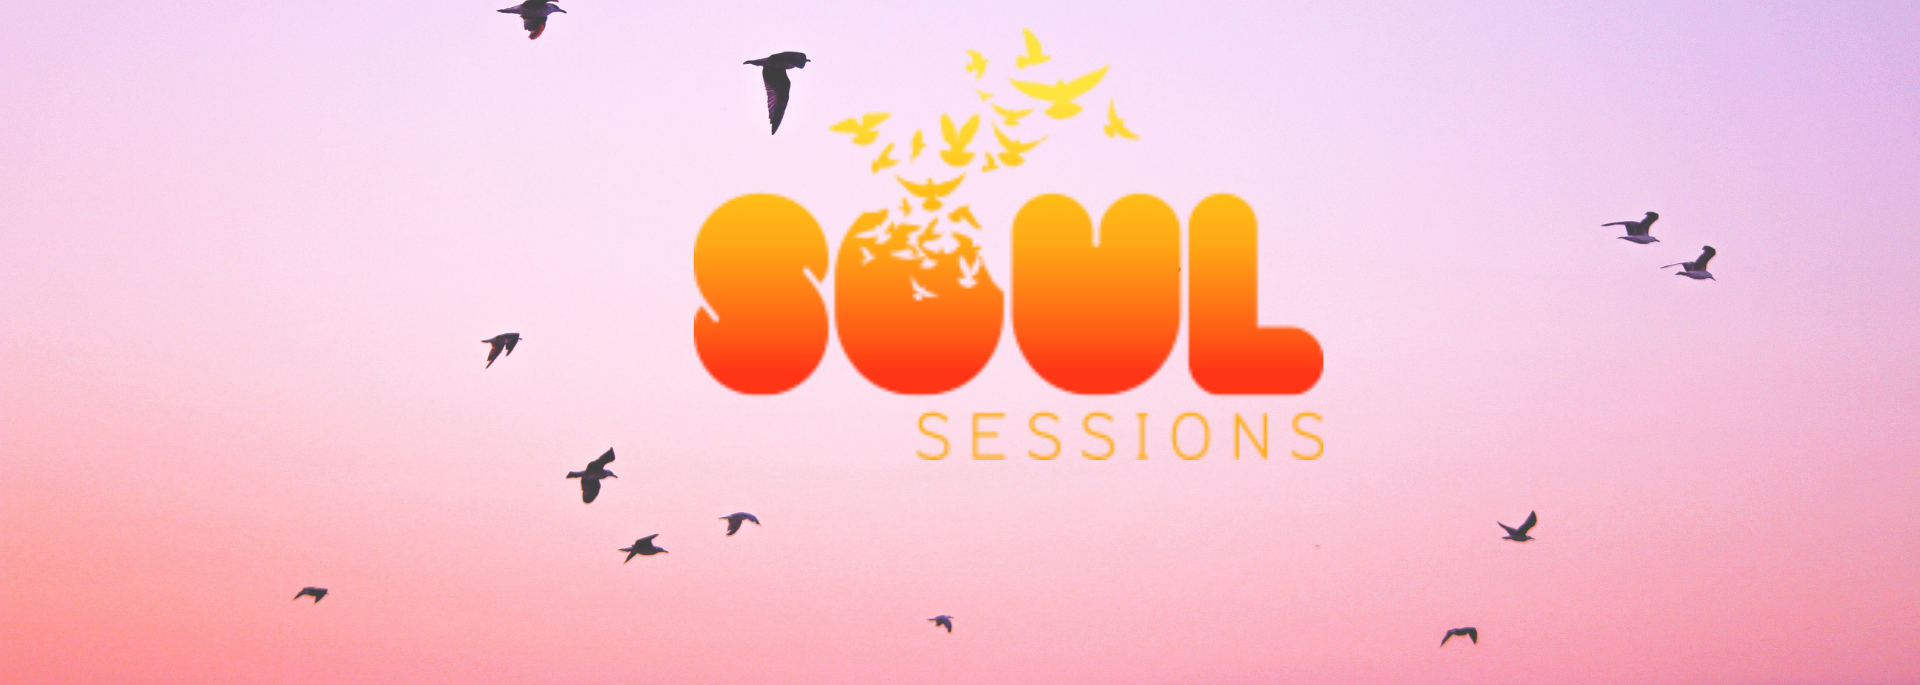 Soul Sessions channel